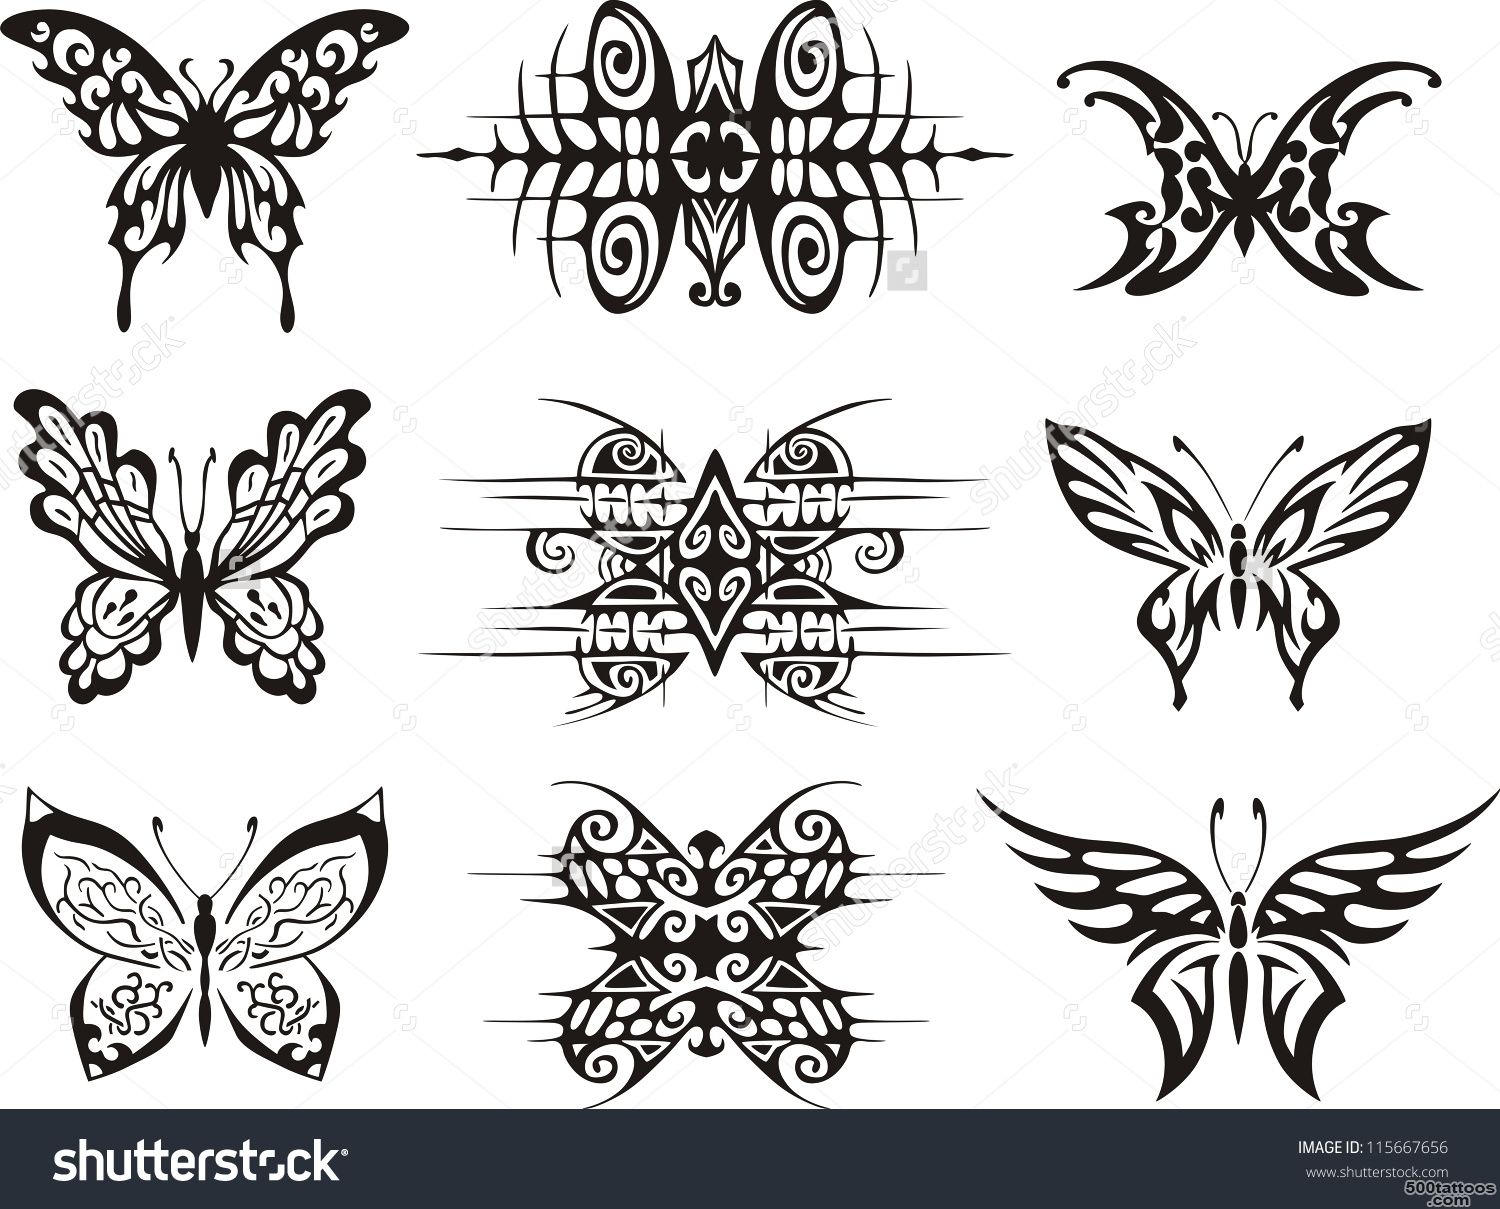 Butterfly Tattoo Stock Photos, Images, amp Pictures  Shutterstock_45